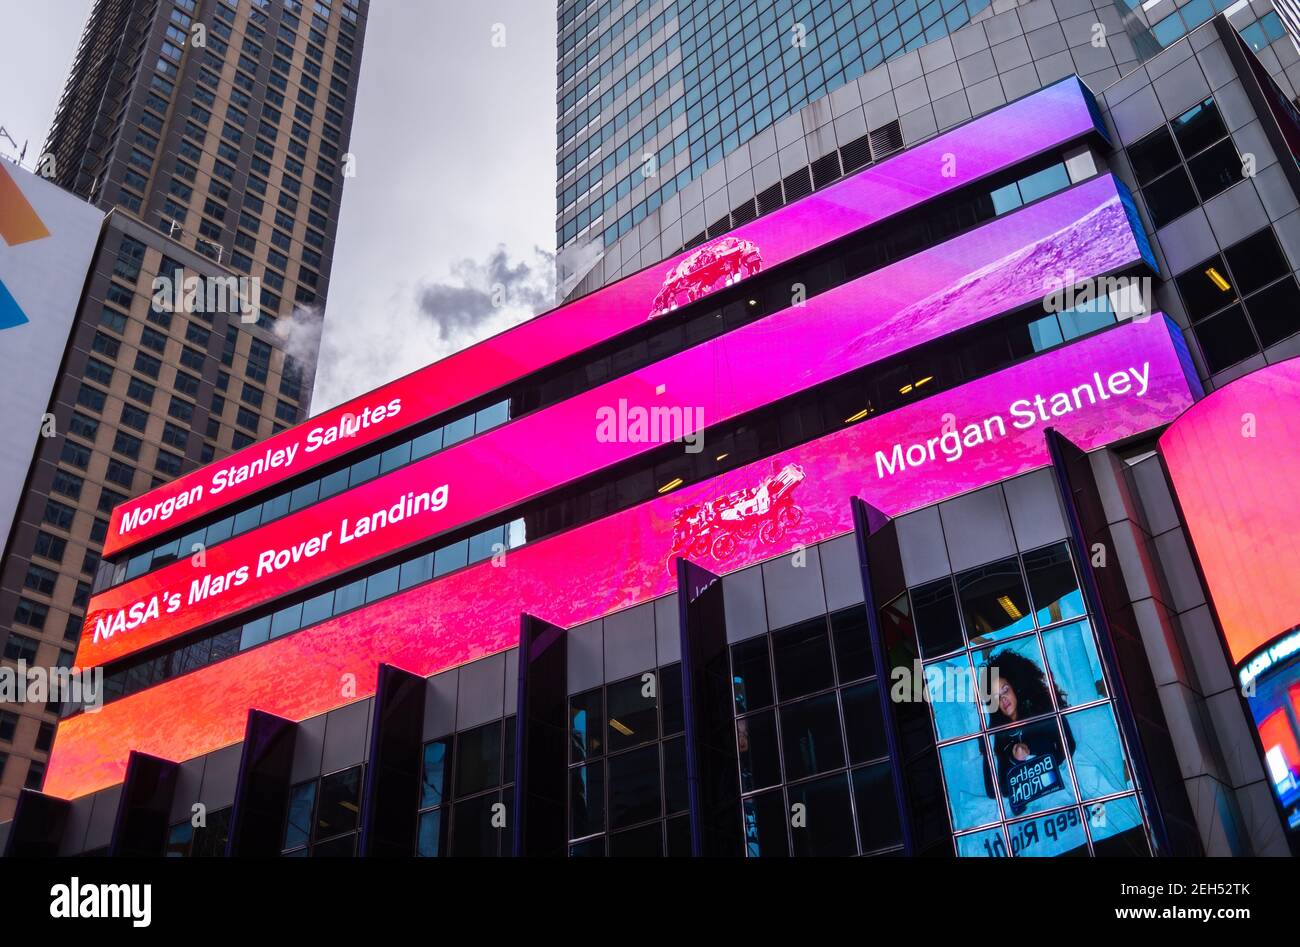 New York, USA. 18th Feb 2021. The news banner on the Morgan Stanley video board celebrates the successful landing of the NASA Mars Perseverance rover on the surface of the Red Planet February 18, 2021 in New York City, New York. Perseverance will search for signs of ancient microbial life. Credit: Planetpix/Alamy Live News Stock Photo